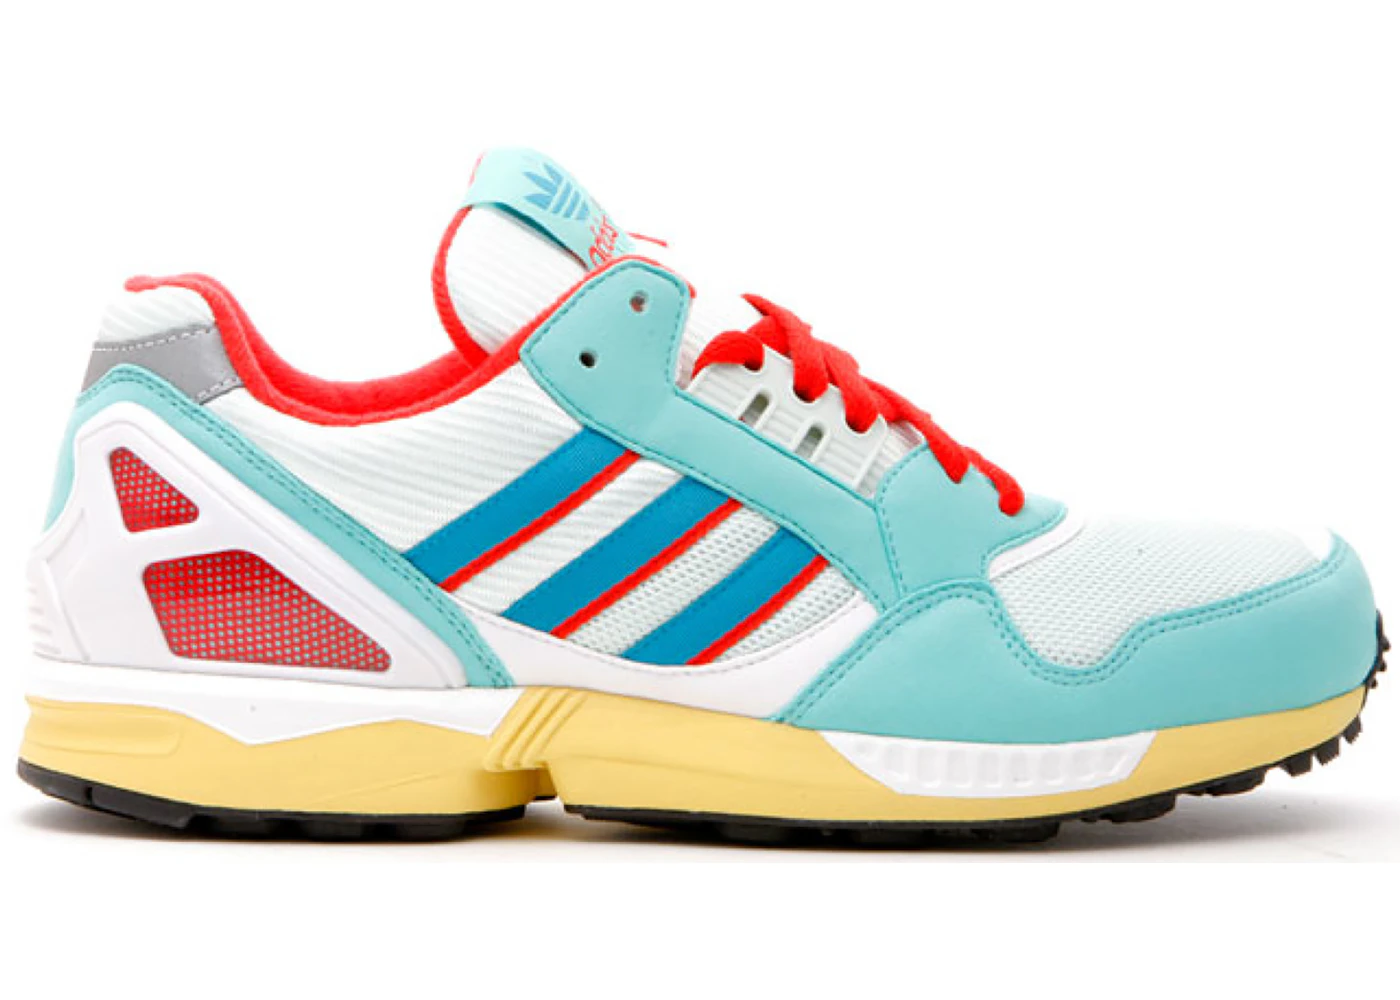 adidas ZX 9000 Ocean Turquoise - 99477 - US